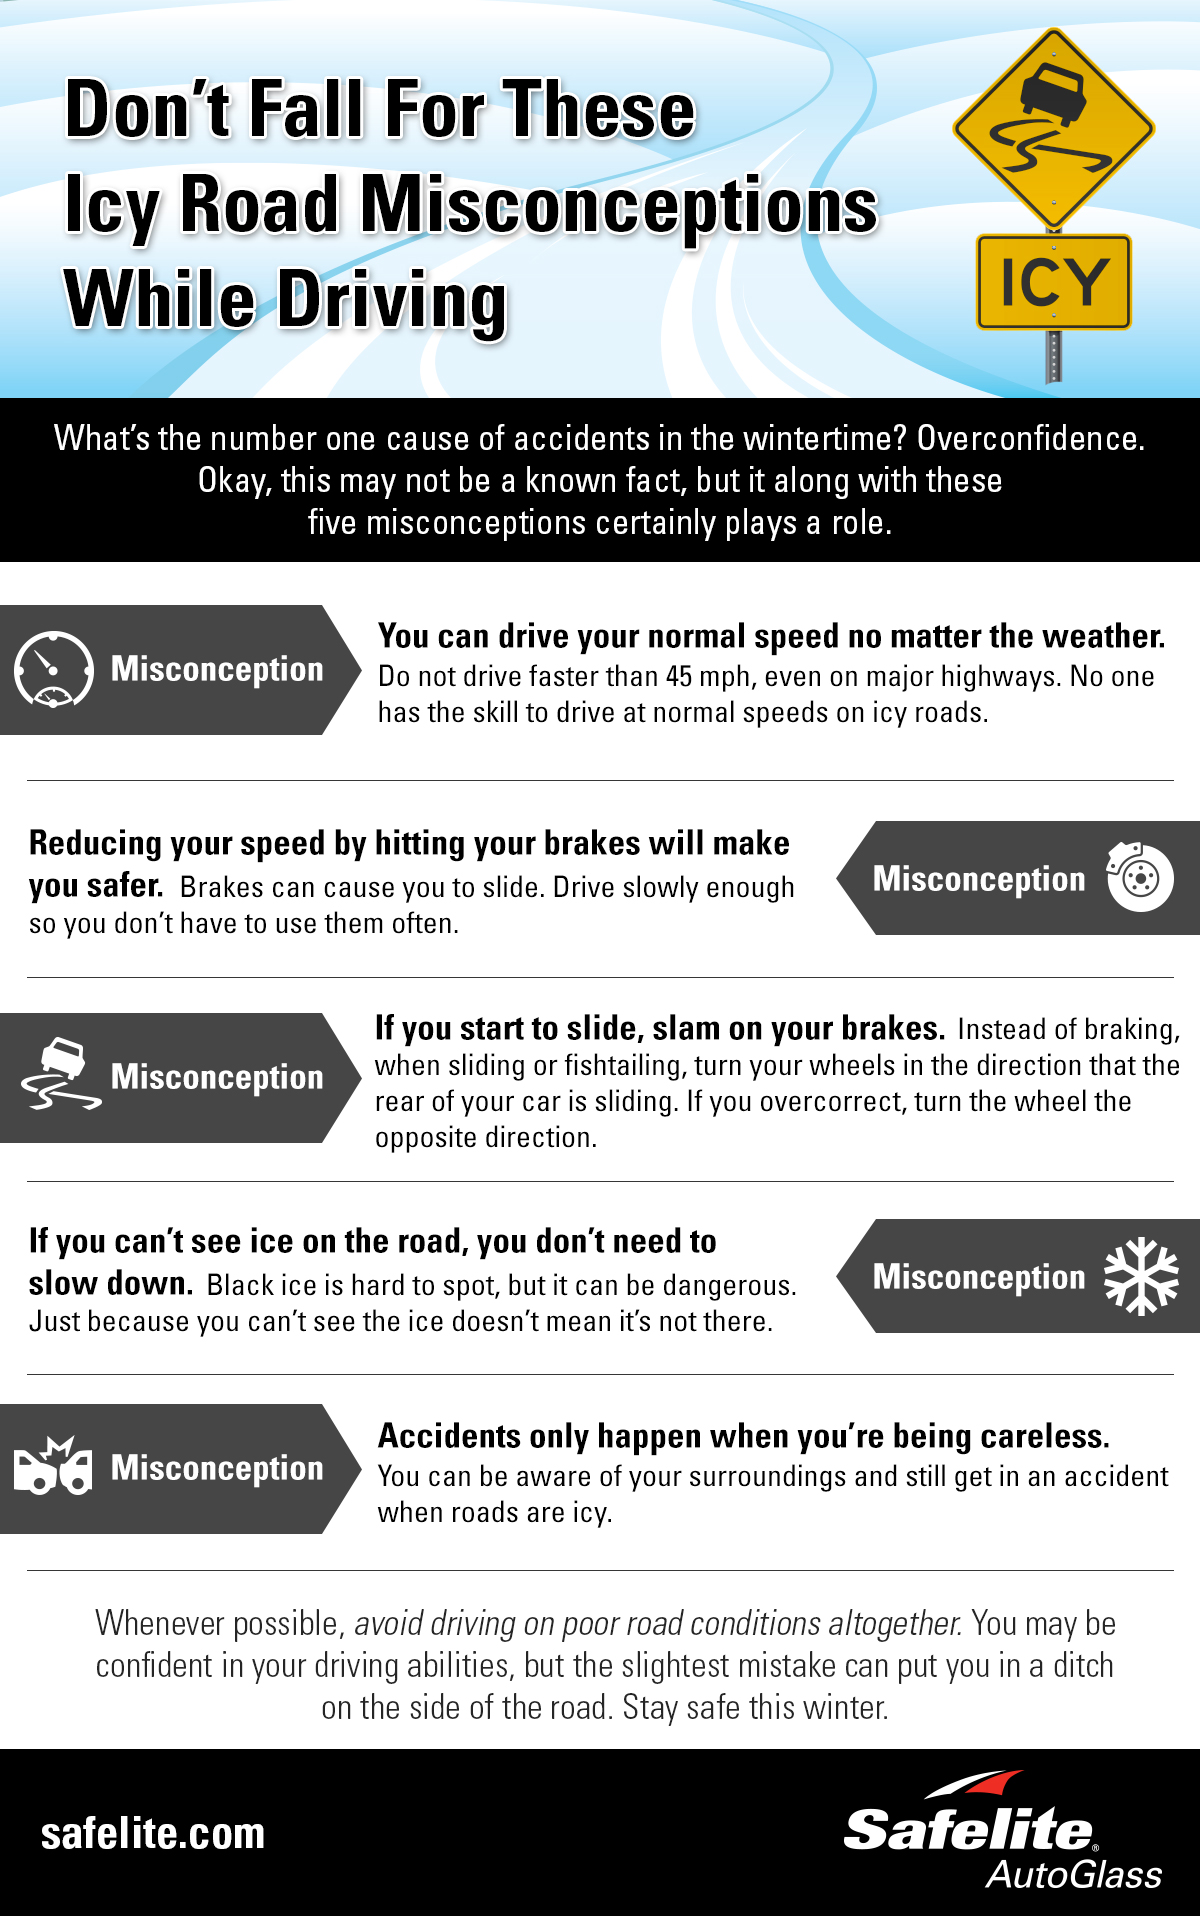 Safelite shares common misconceptions and dangers of driving on icy roads.